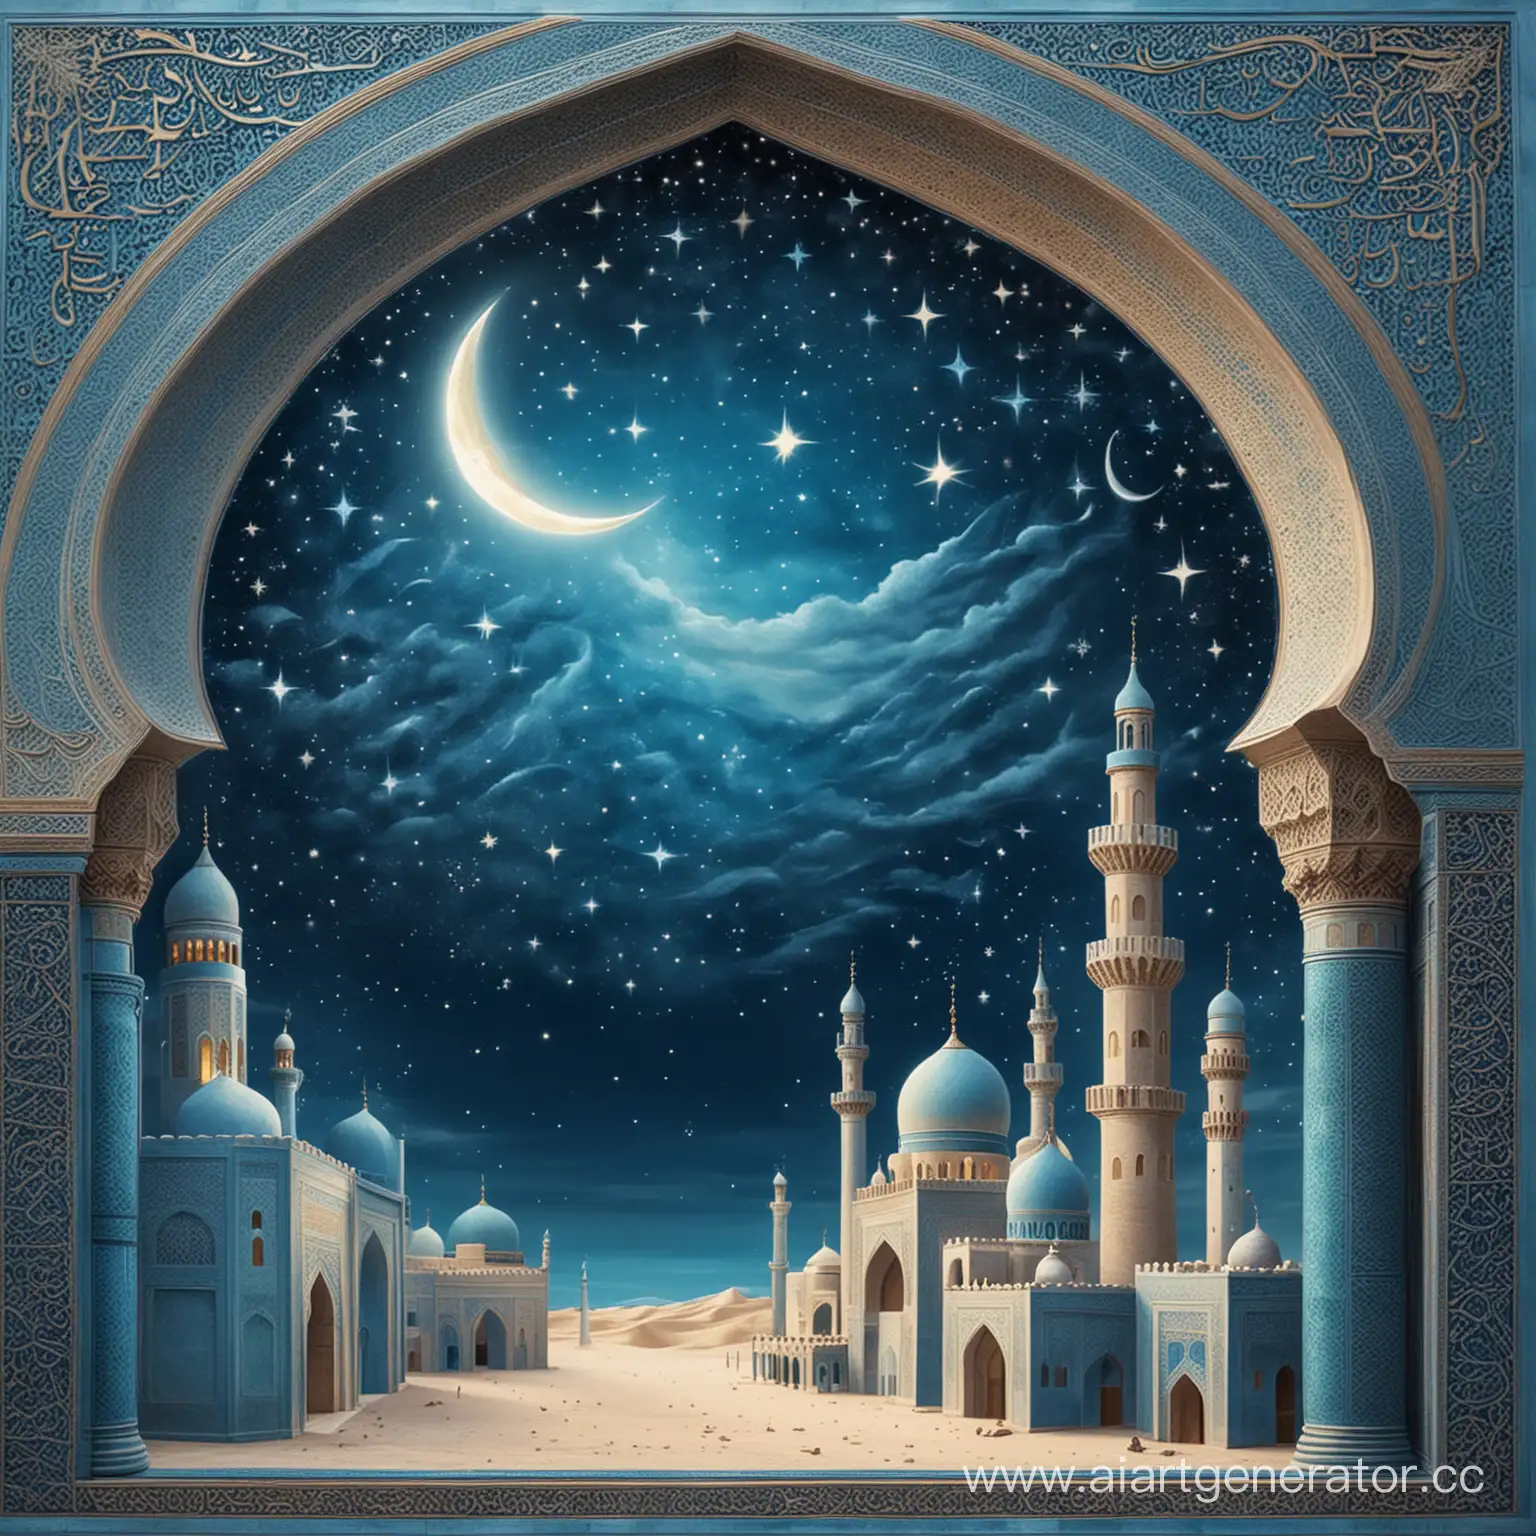 Ramadan-Crescent-Moon-and-Mosque-Silhouette-in-Blue-Tones